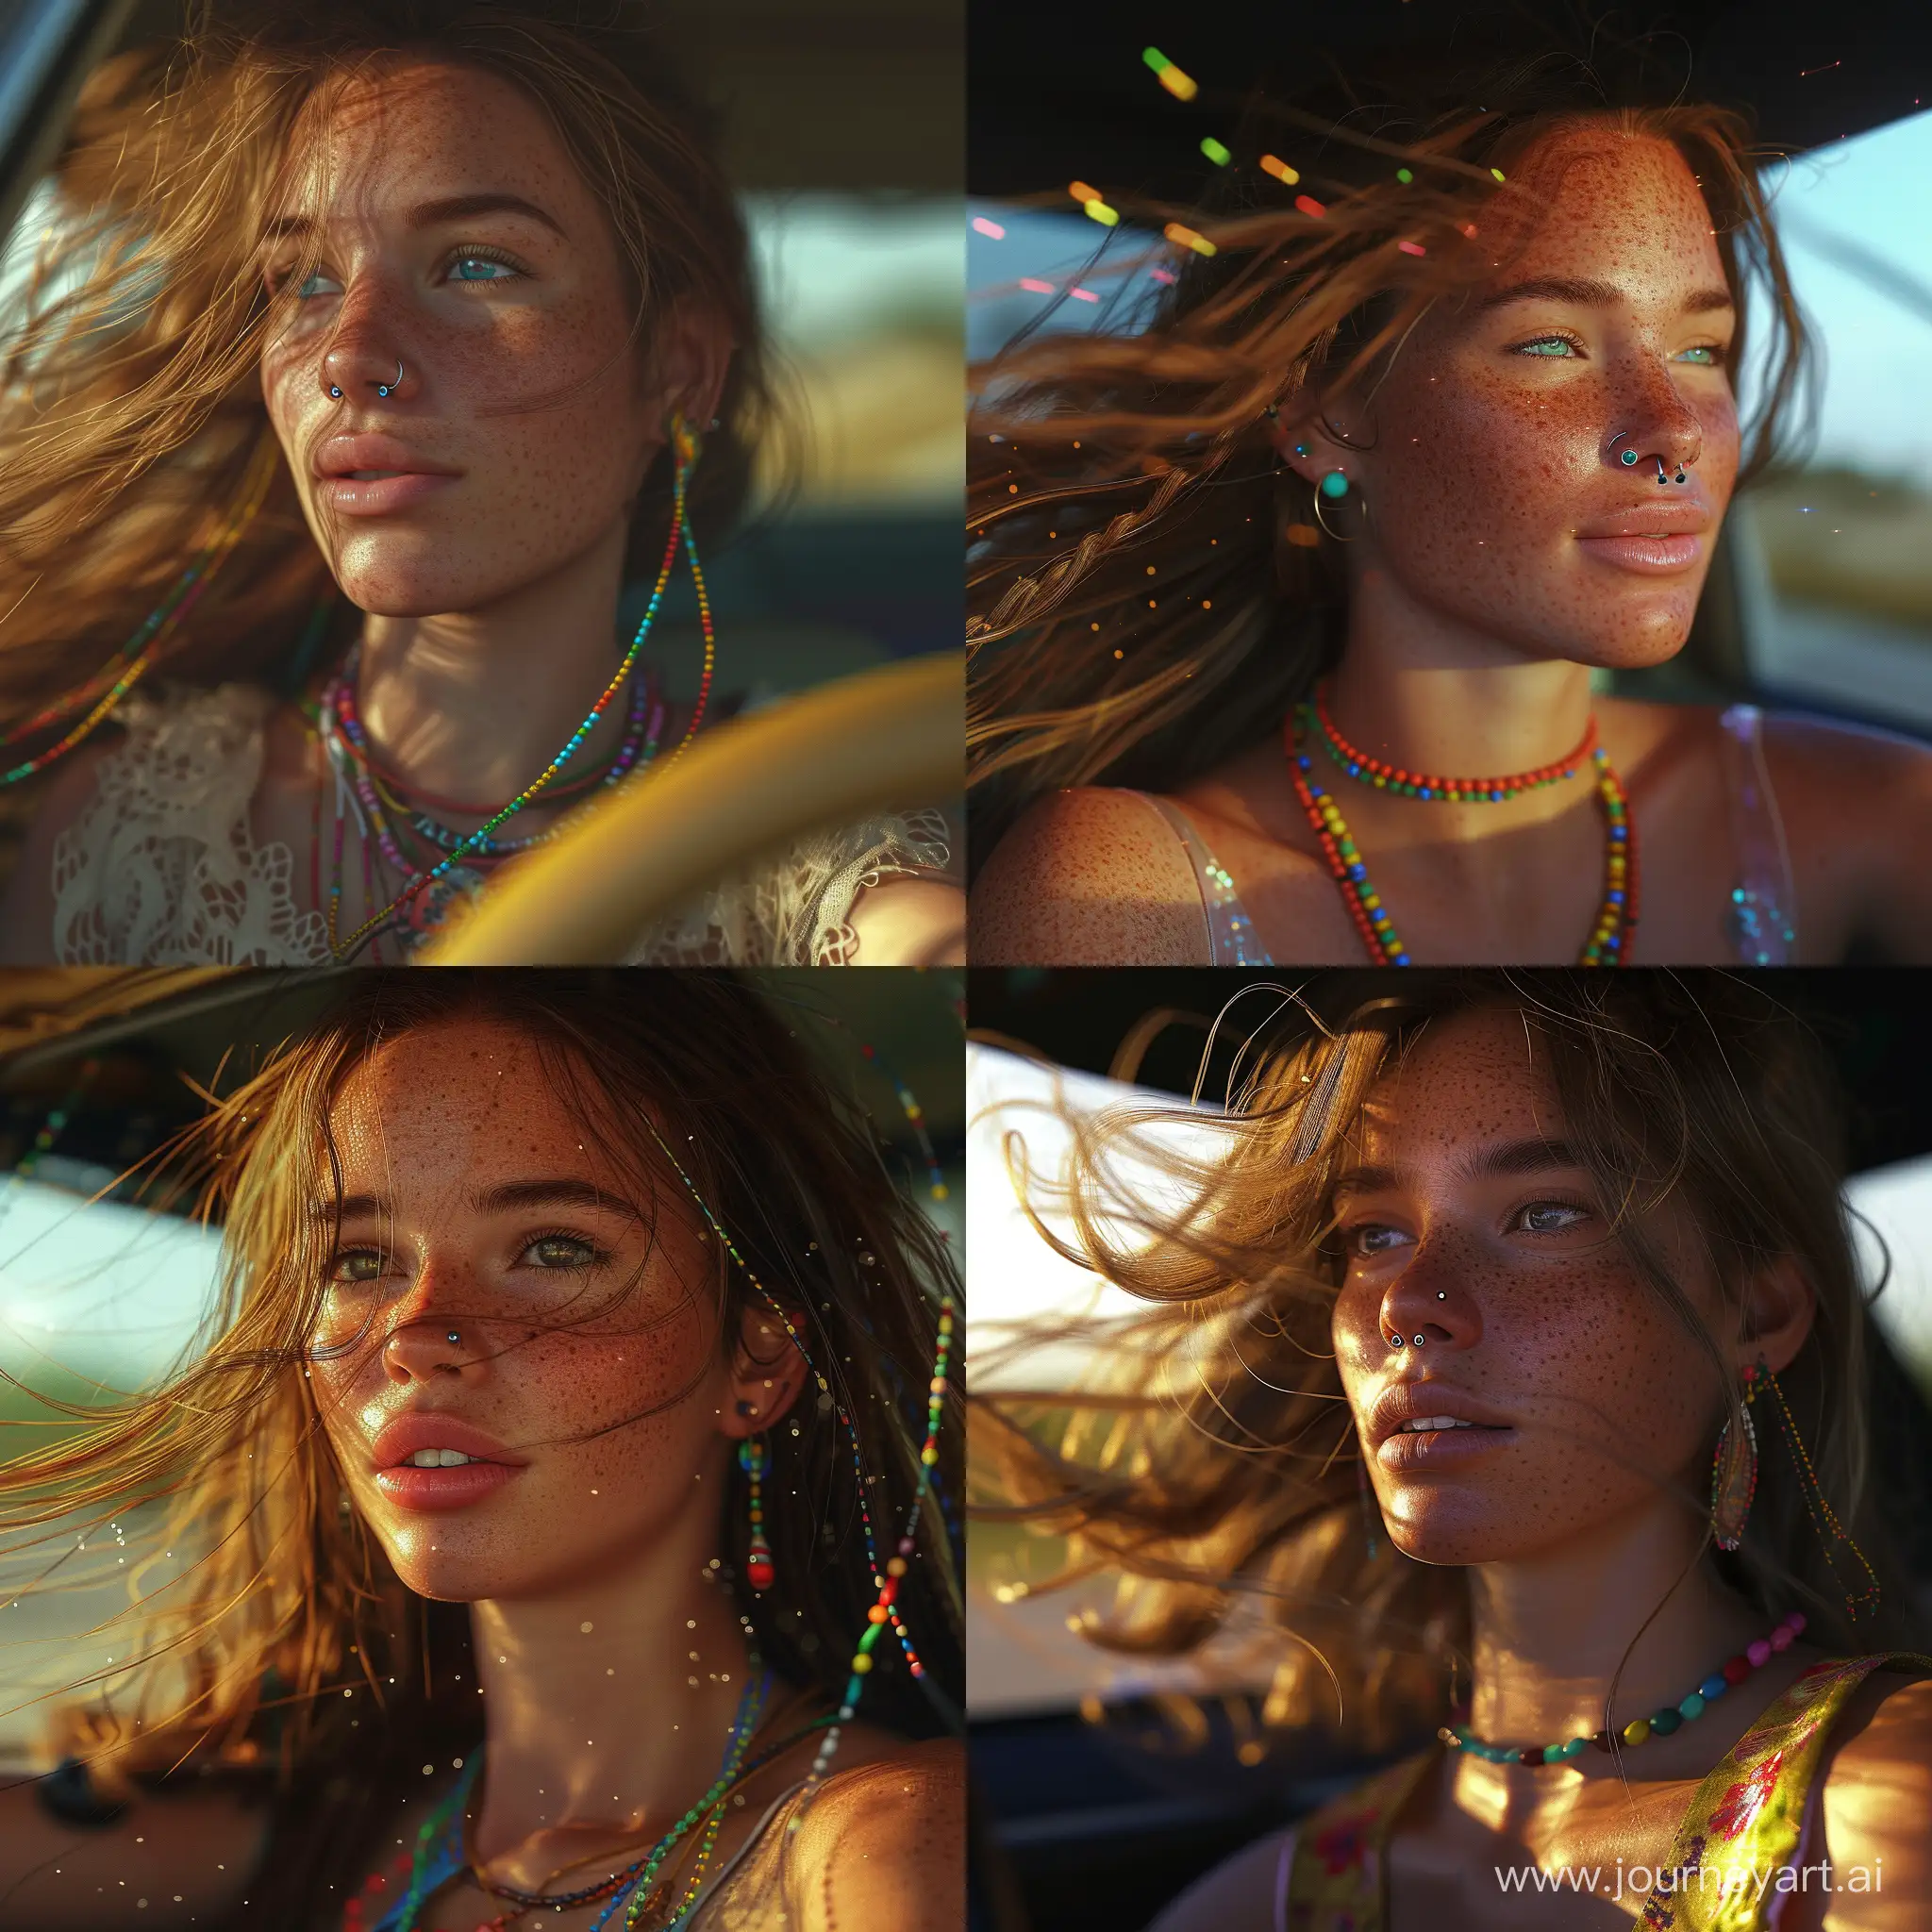 Hippie-Girl-Driving-Vibrant-Summer-Journey-with-Bohemian-Vibes